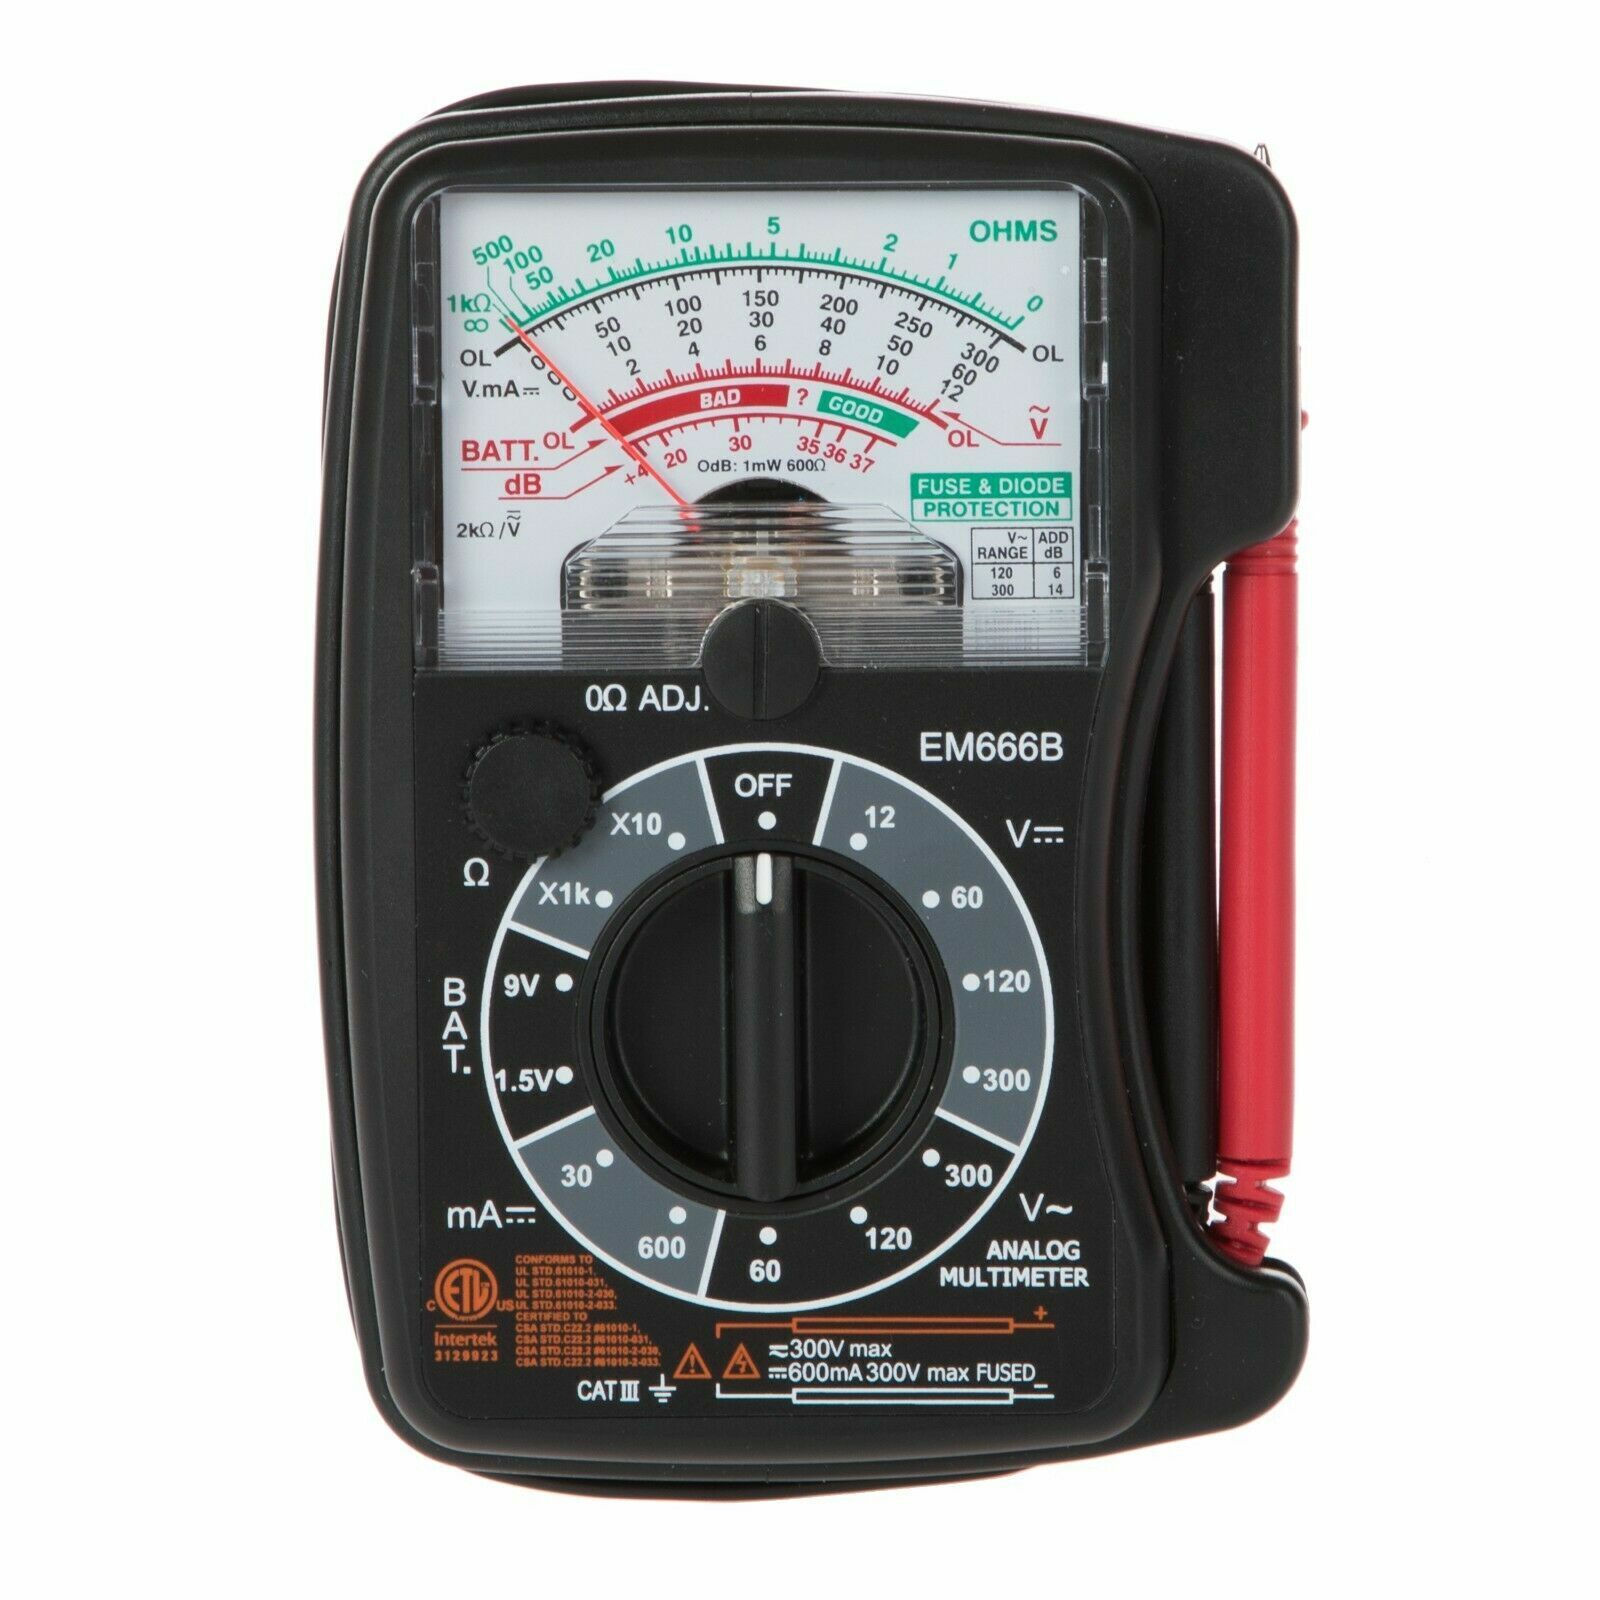 Handy Man Tool Electric Circuits and Power Outlets Analog Multi-meter Tester